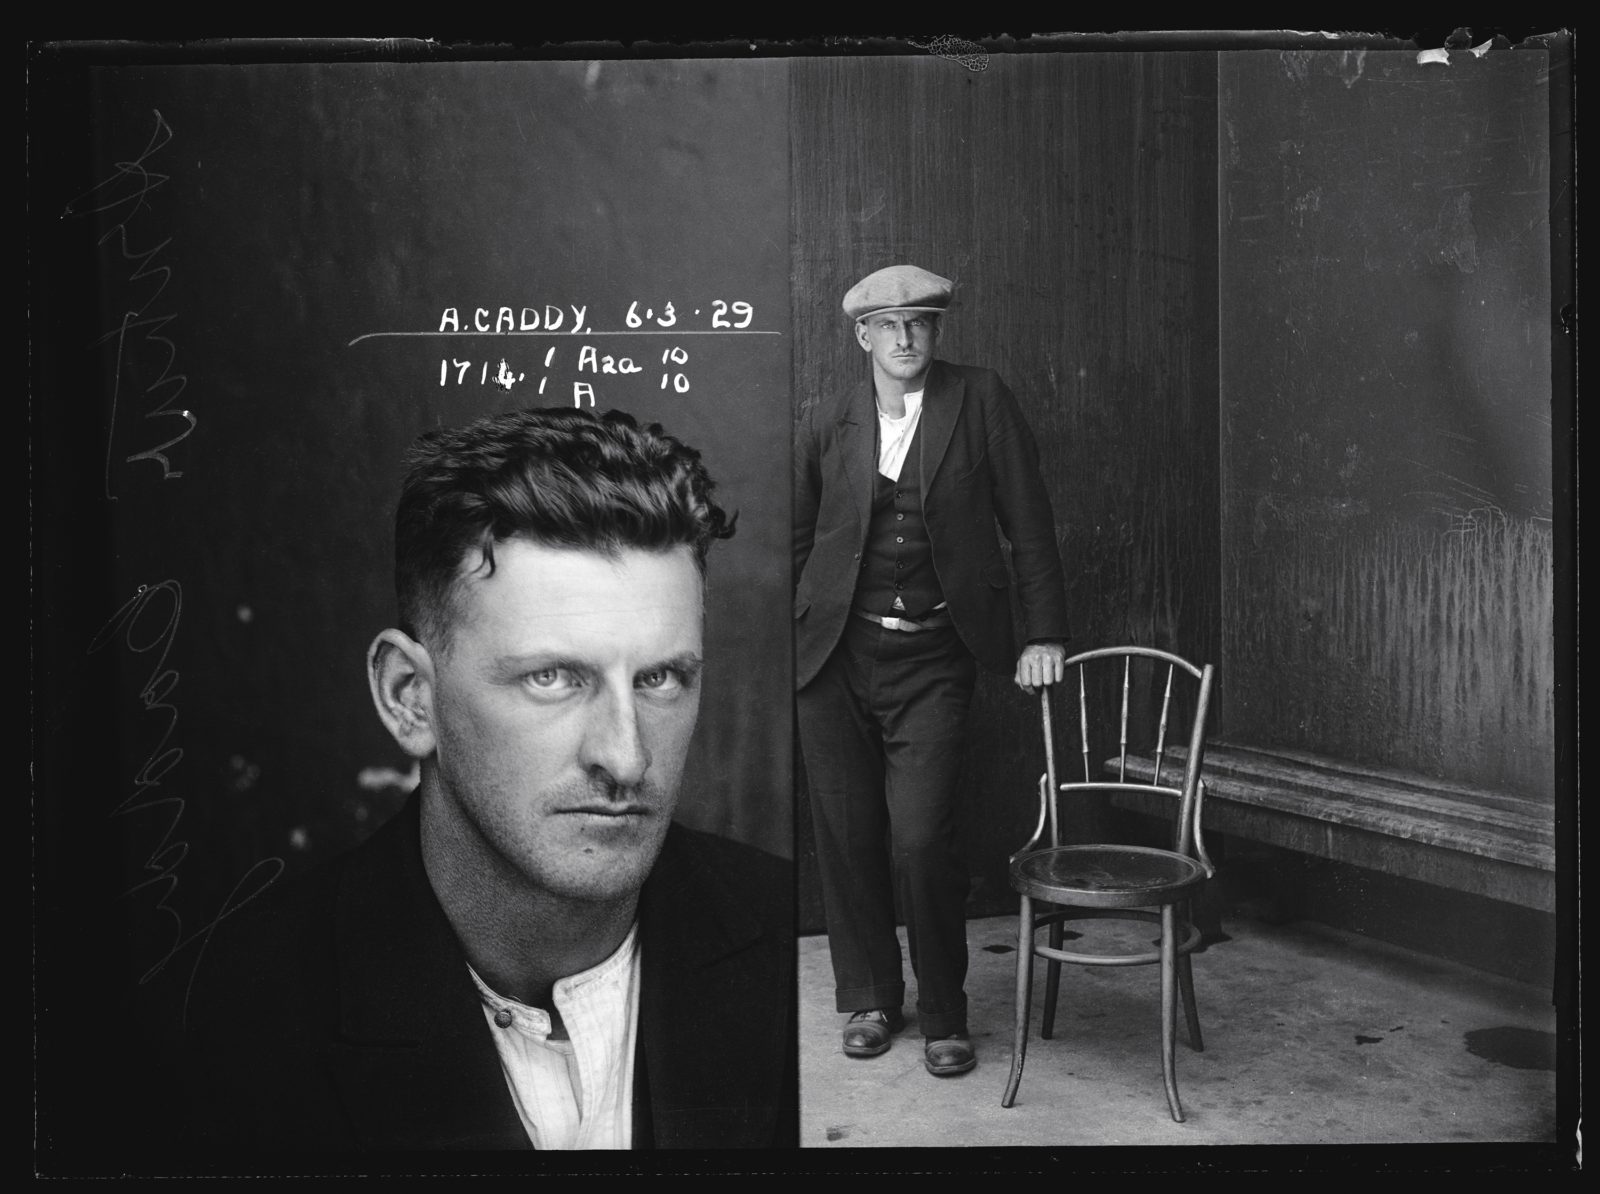 Image Credit:Arthur Caddy, 6 March 1929, Suspect, offence unknown, Special Photograph number 1714, NSW Police Forensic Photography Archive, Sydney Living Museums